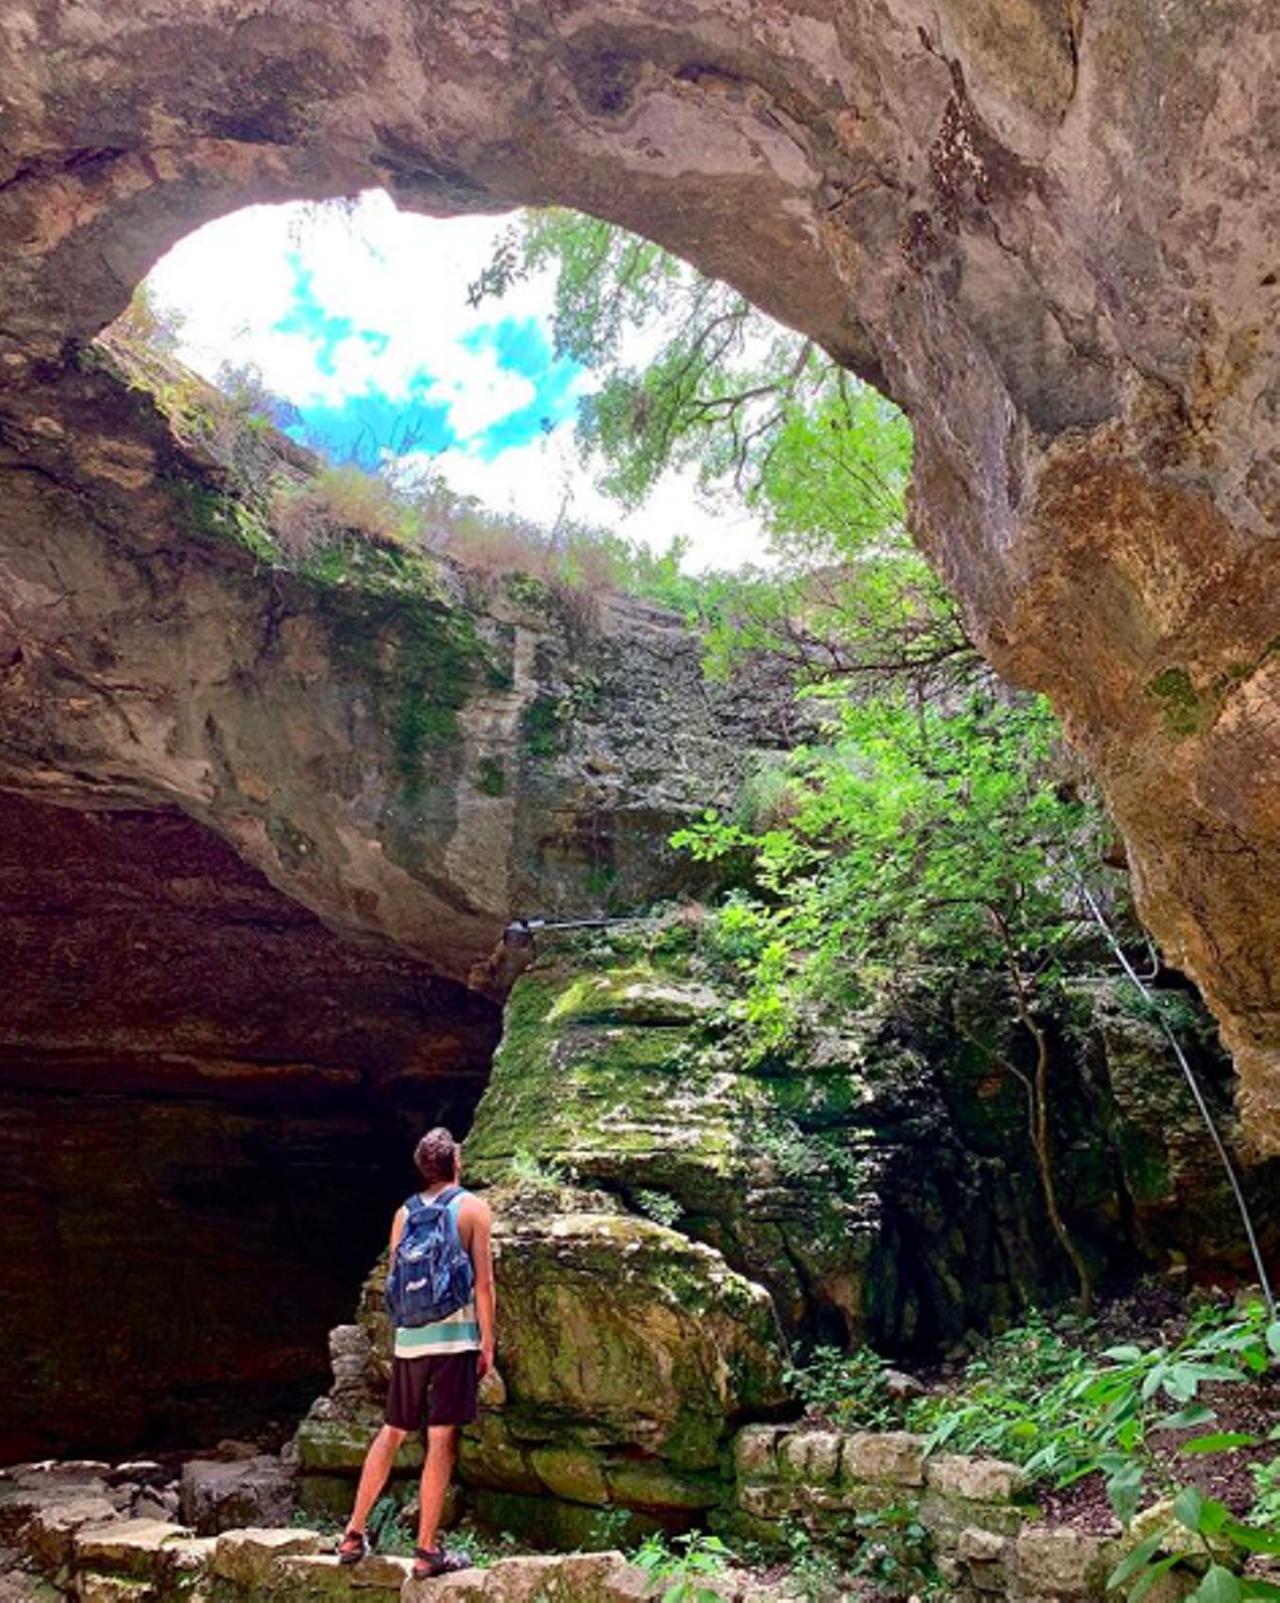 Longhorn Cavern State Park
6211 Park Road 4 S, Burnet, (512) 715-9000, tpwd.texas.gov
If you’re seeking beautiful sights, do yourself a favor and head to Longhorn Cavern. The geology here is unbeatable as the cavern is simply breathtaking. In addition to a tour, make sure to take a hike and relax with a picnic. To truly appreciate it, read up on the history first.
Photo via Instagram / brandonbouchard26